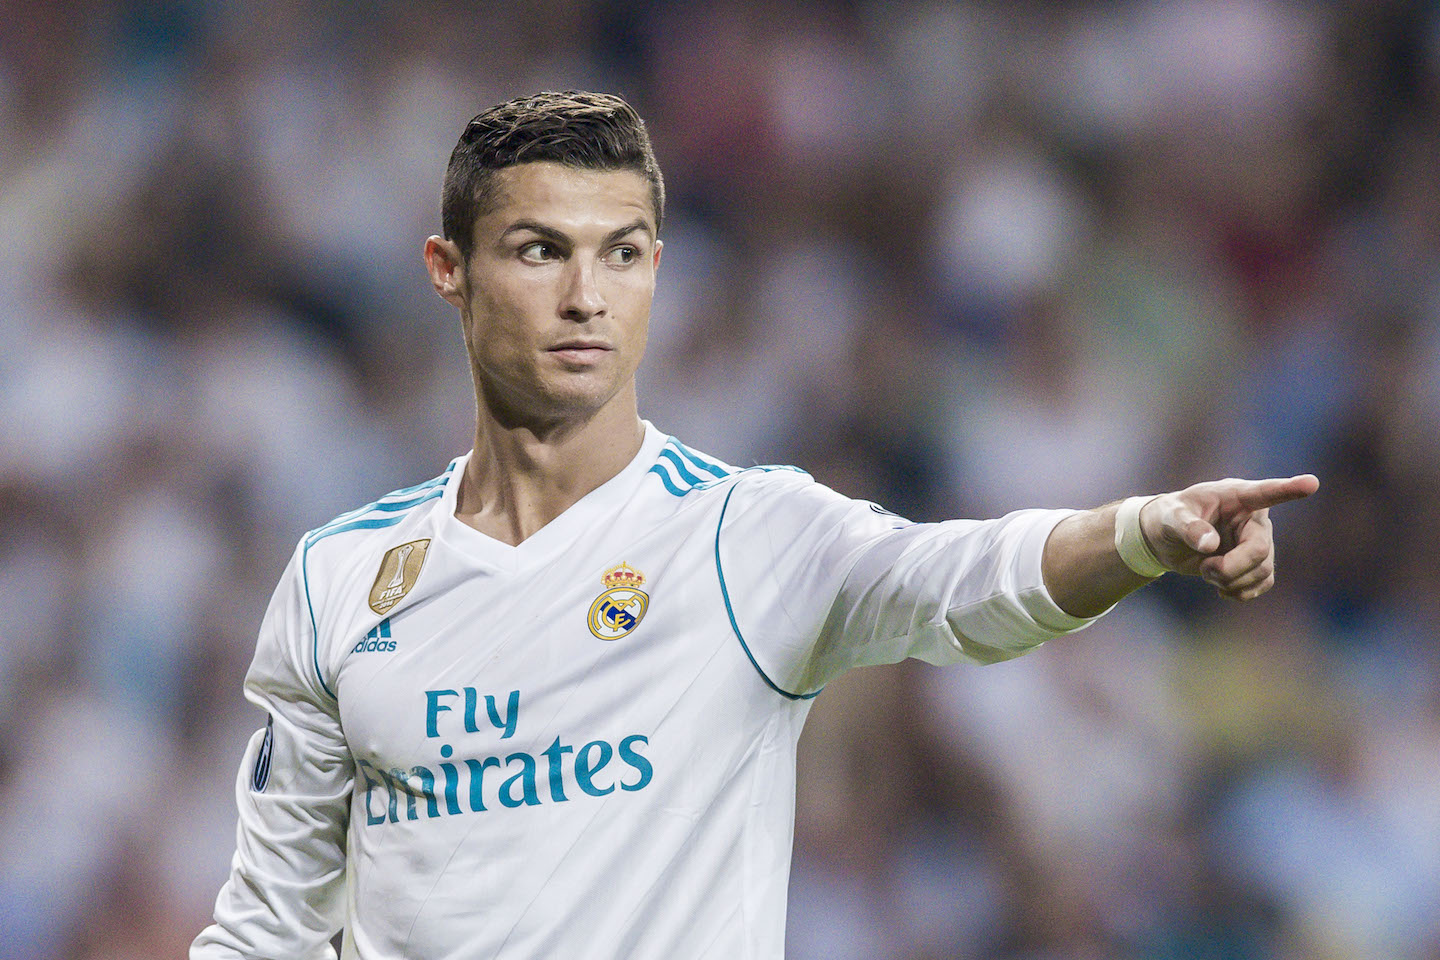 Cristiano Ronaldo Leads Espn List Of Most Famous Athletes Ahead Of